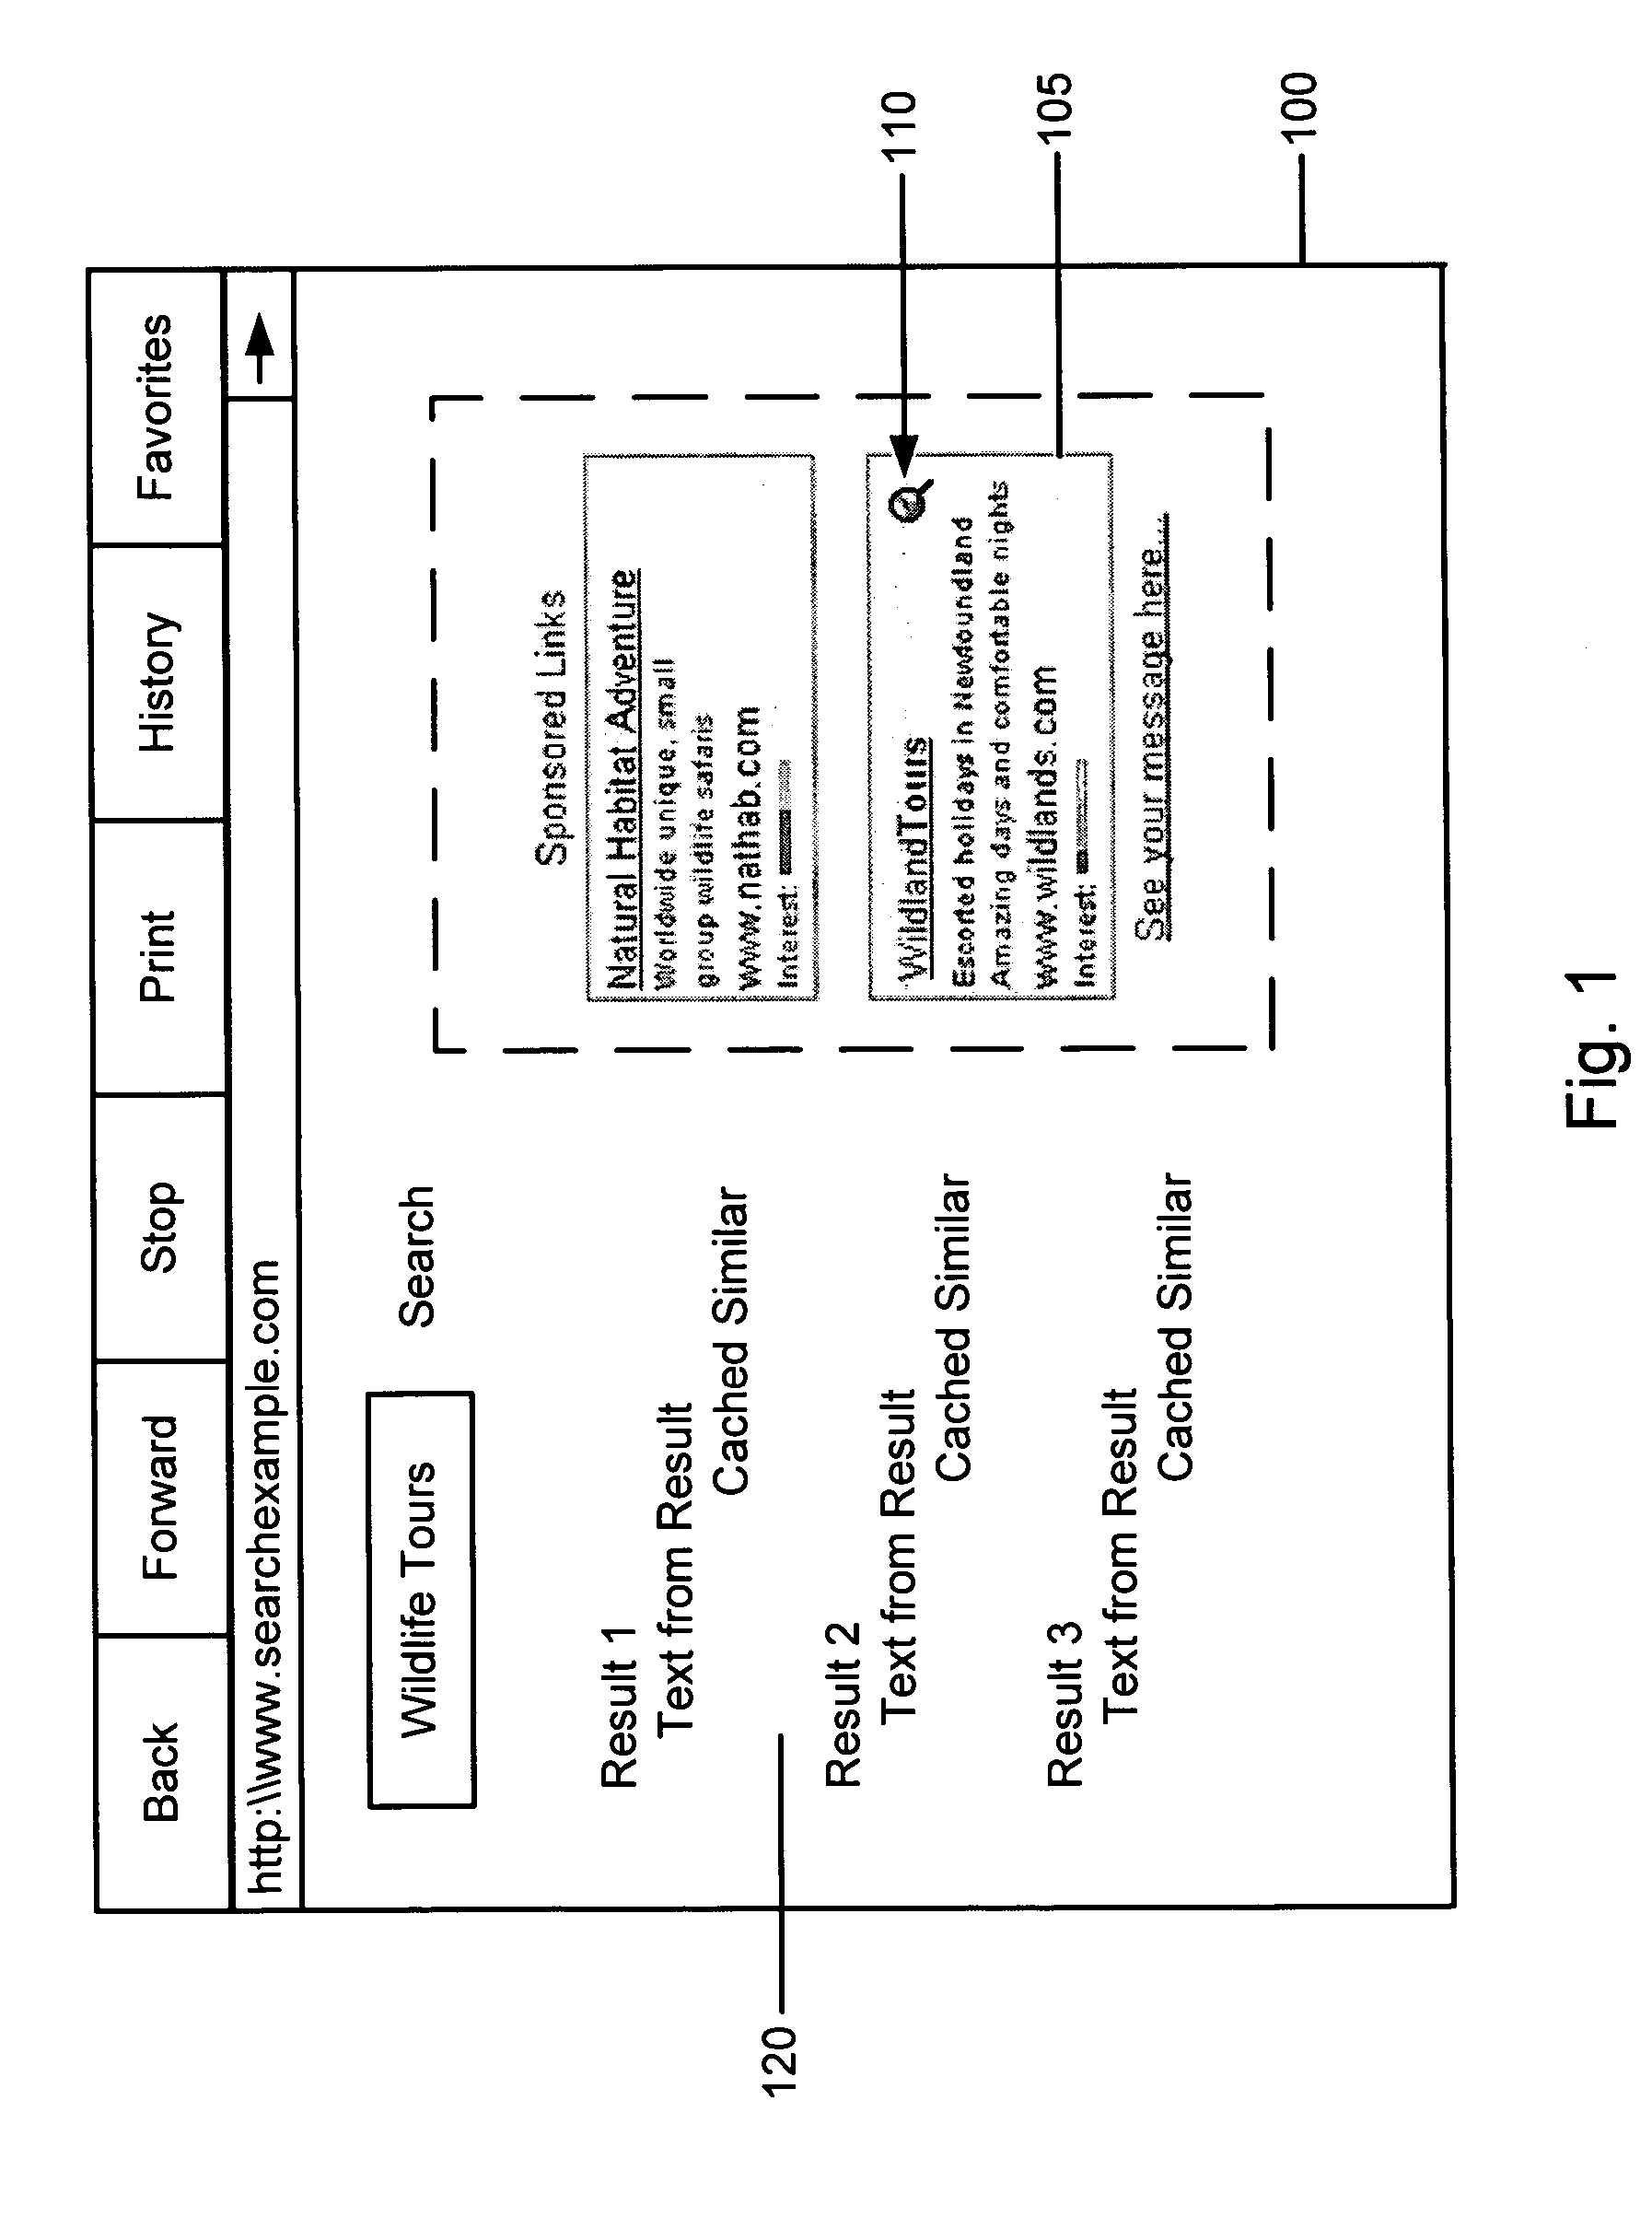 System and method for enabling an advertisement to follow the user to additional web pages